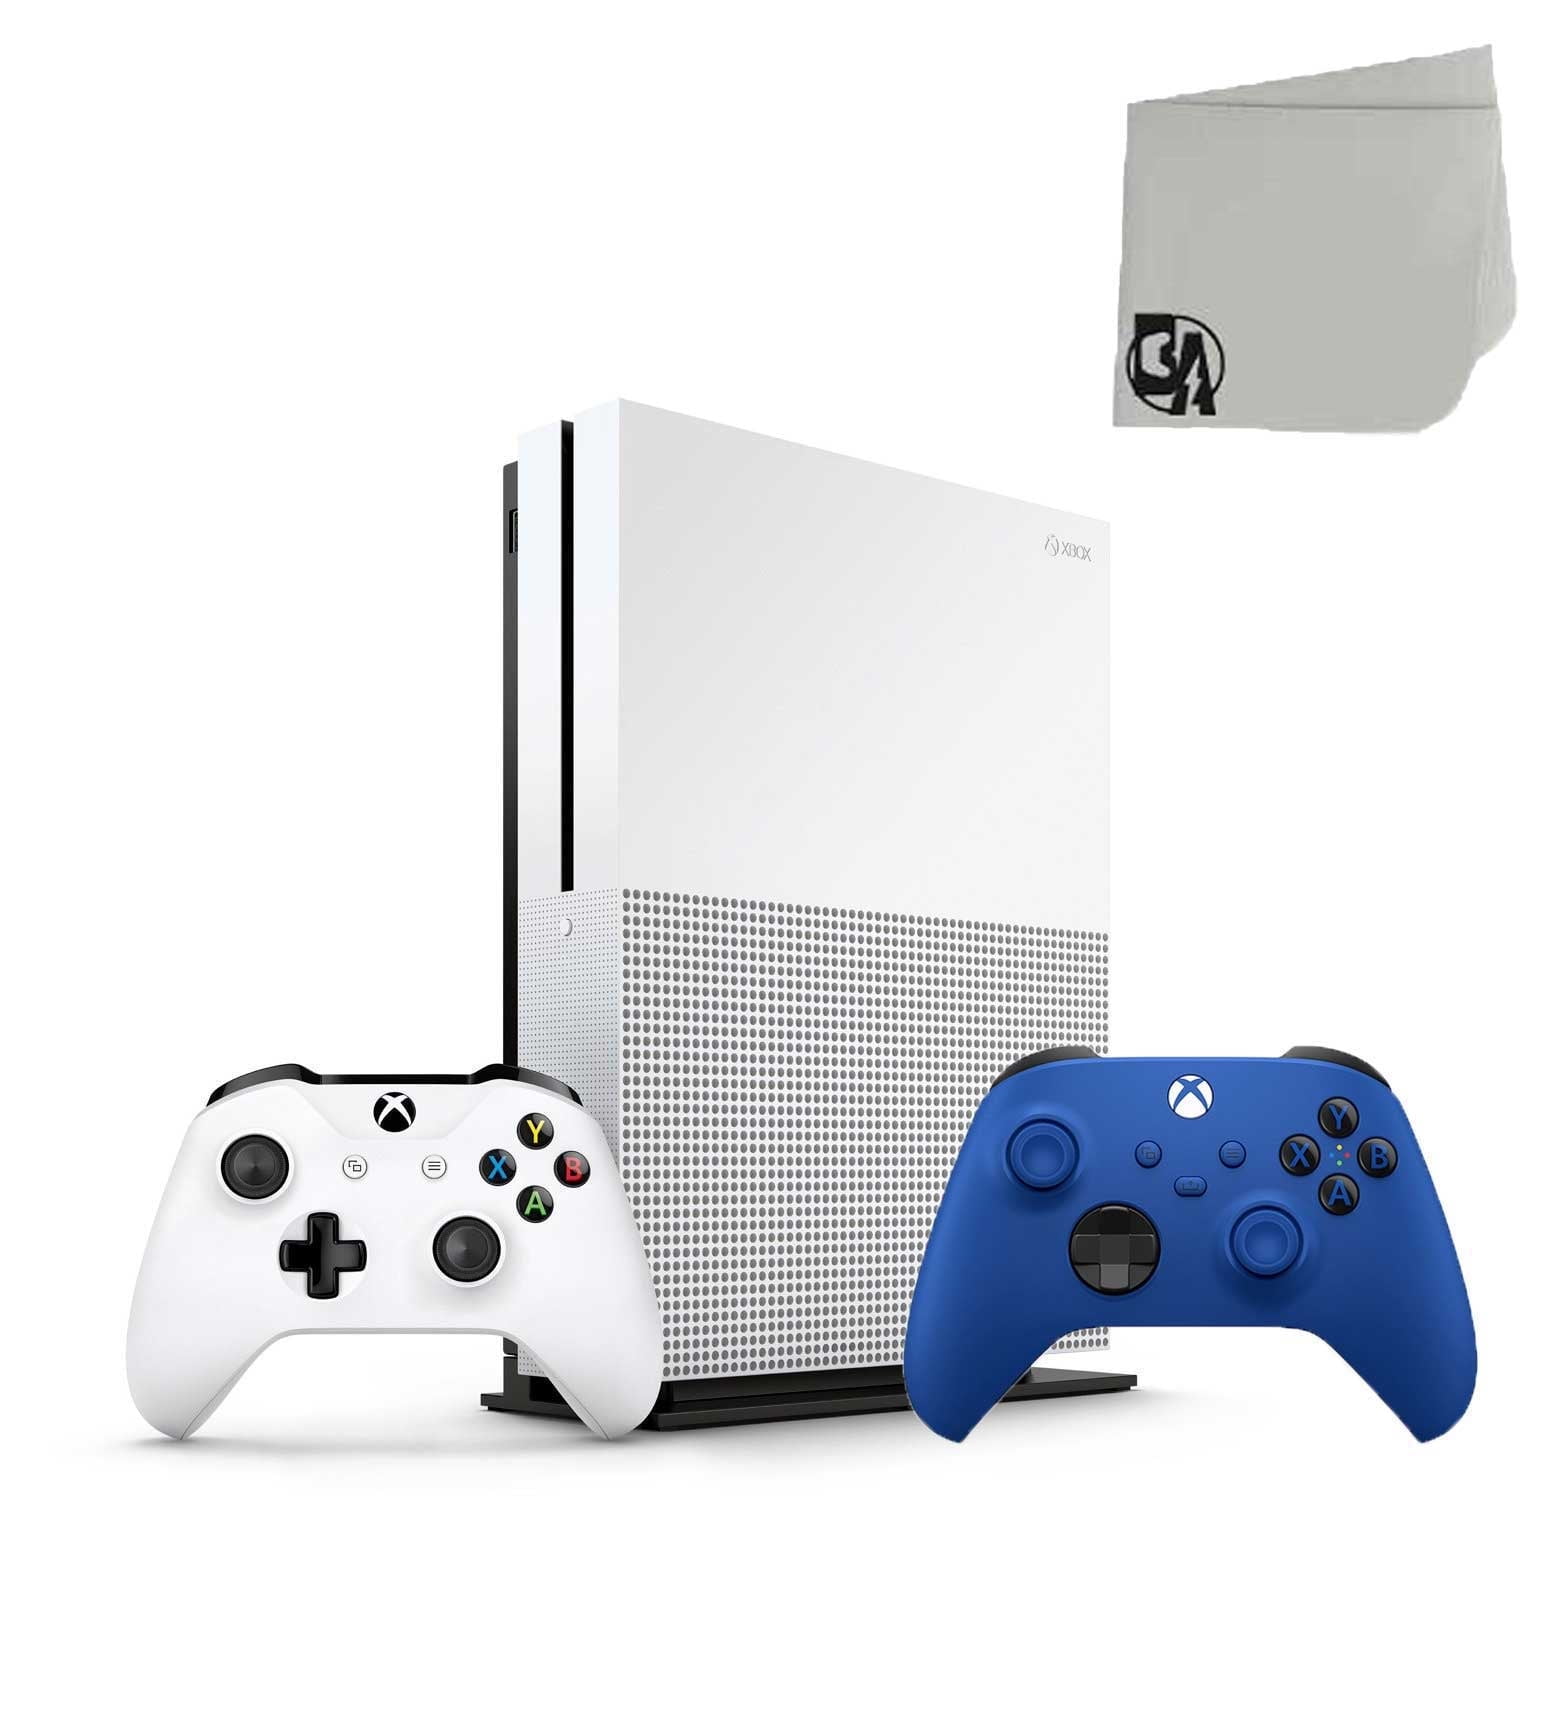 Pre-Owned Microsoft Xbox One S White 1TB Gaming Console with 